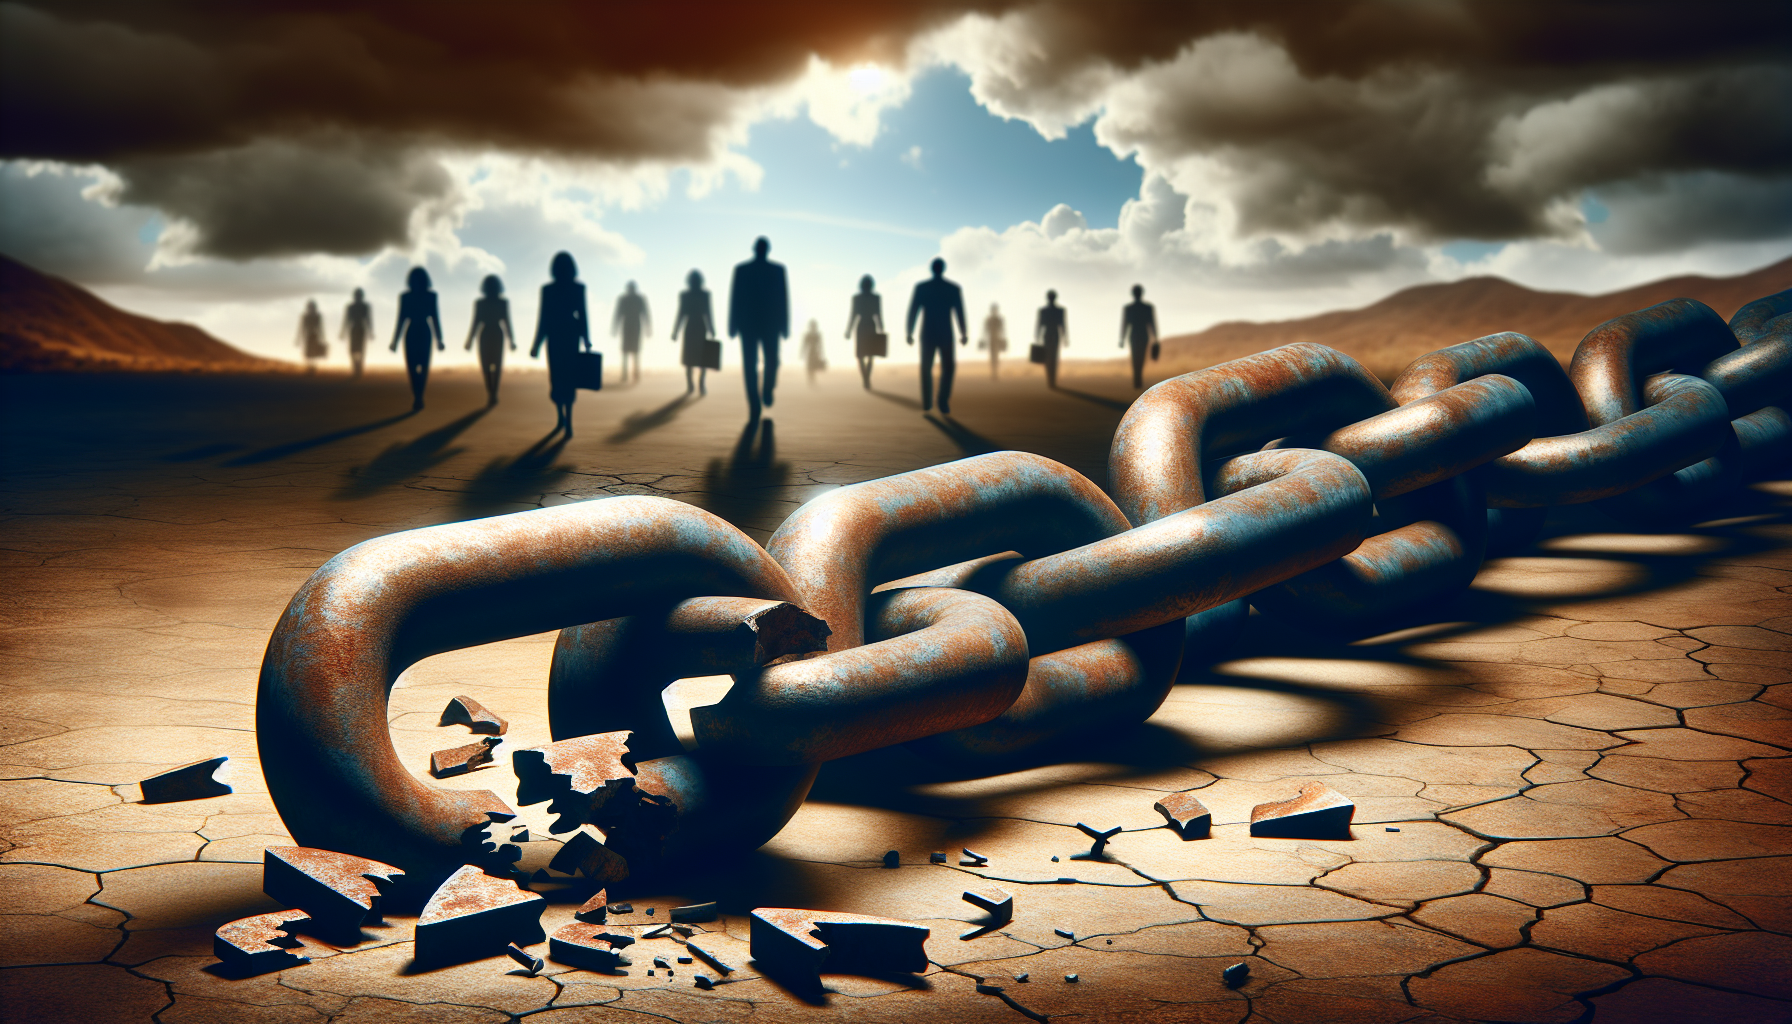 Illustration of a broken chain representing the consequences of poor leadership